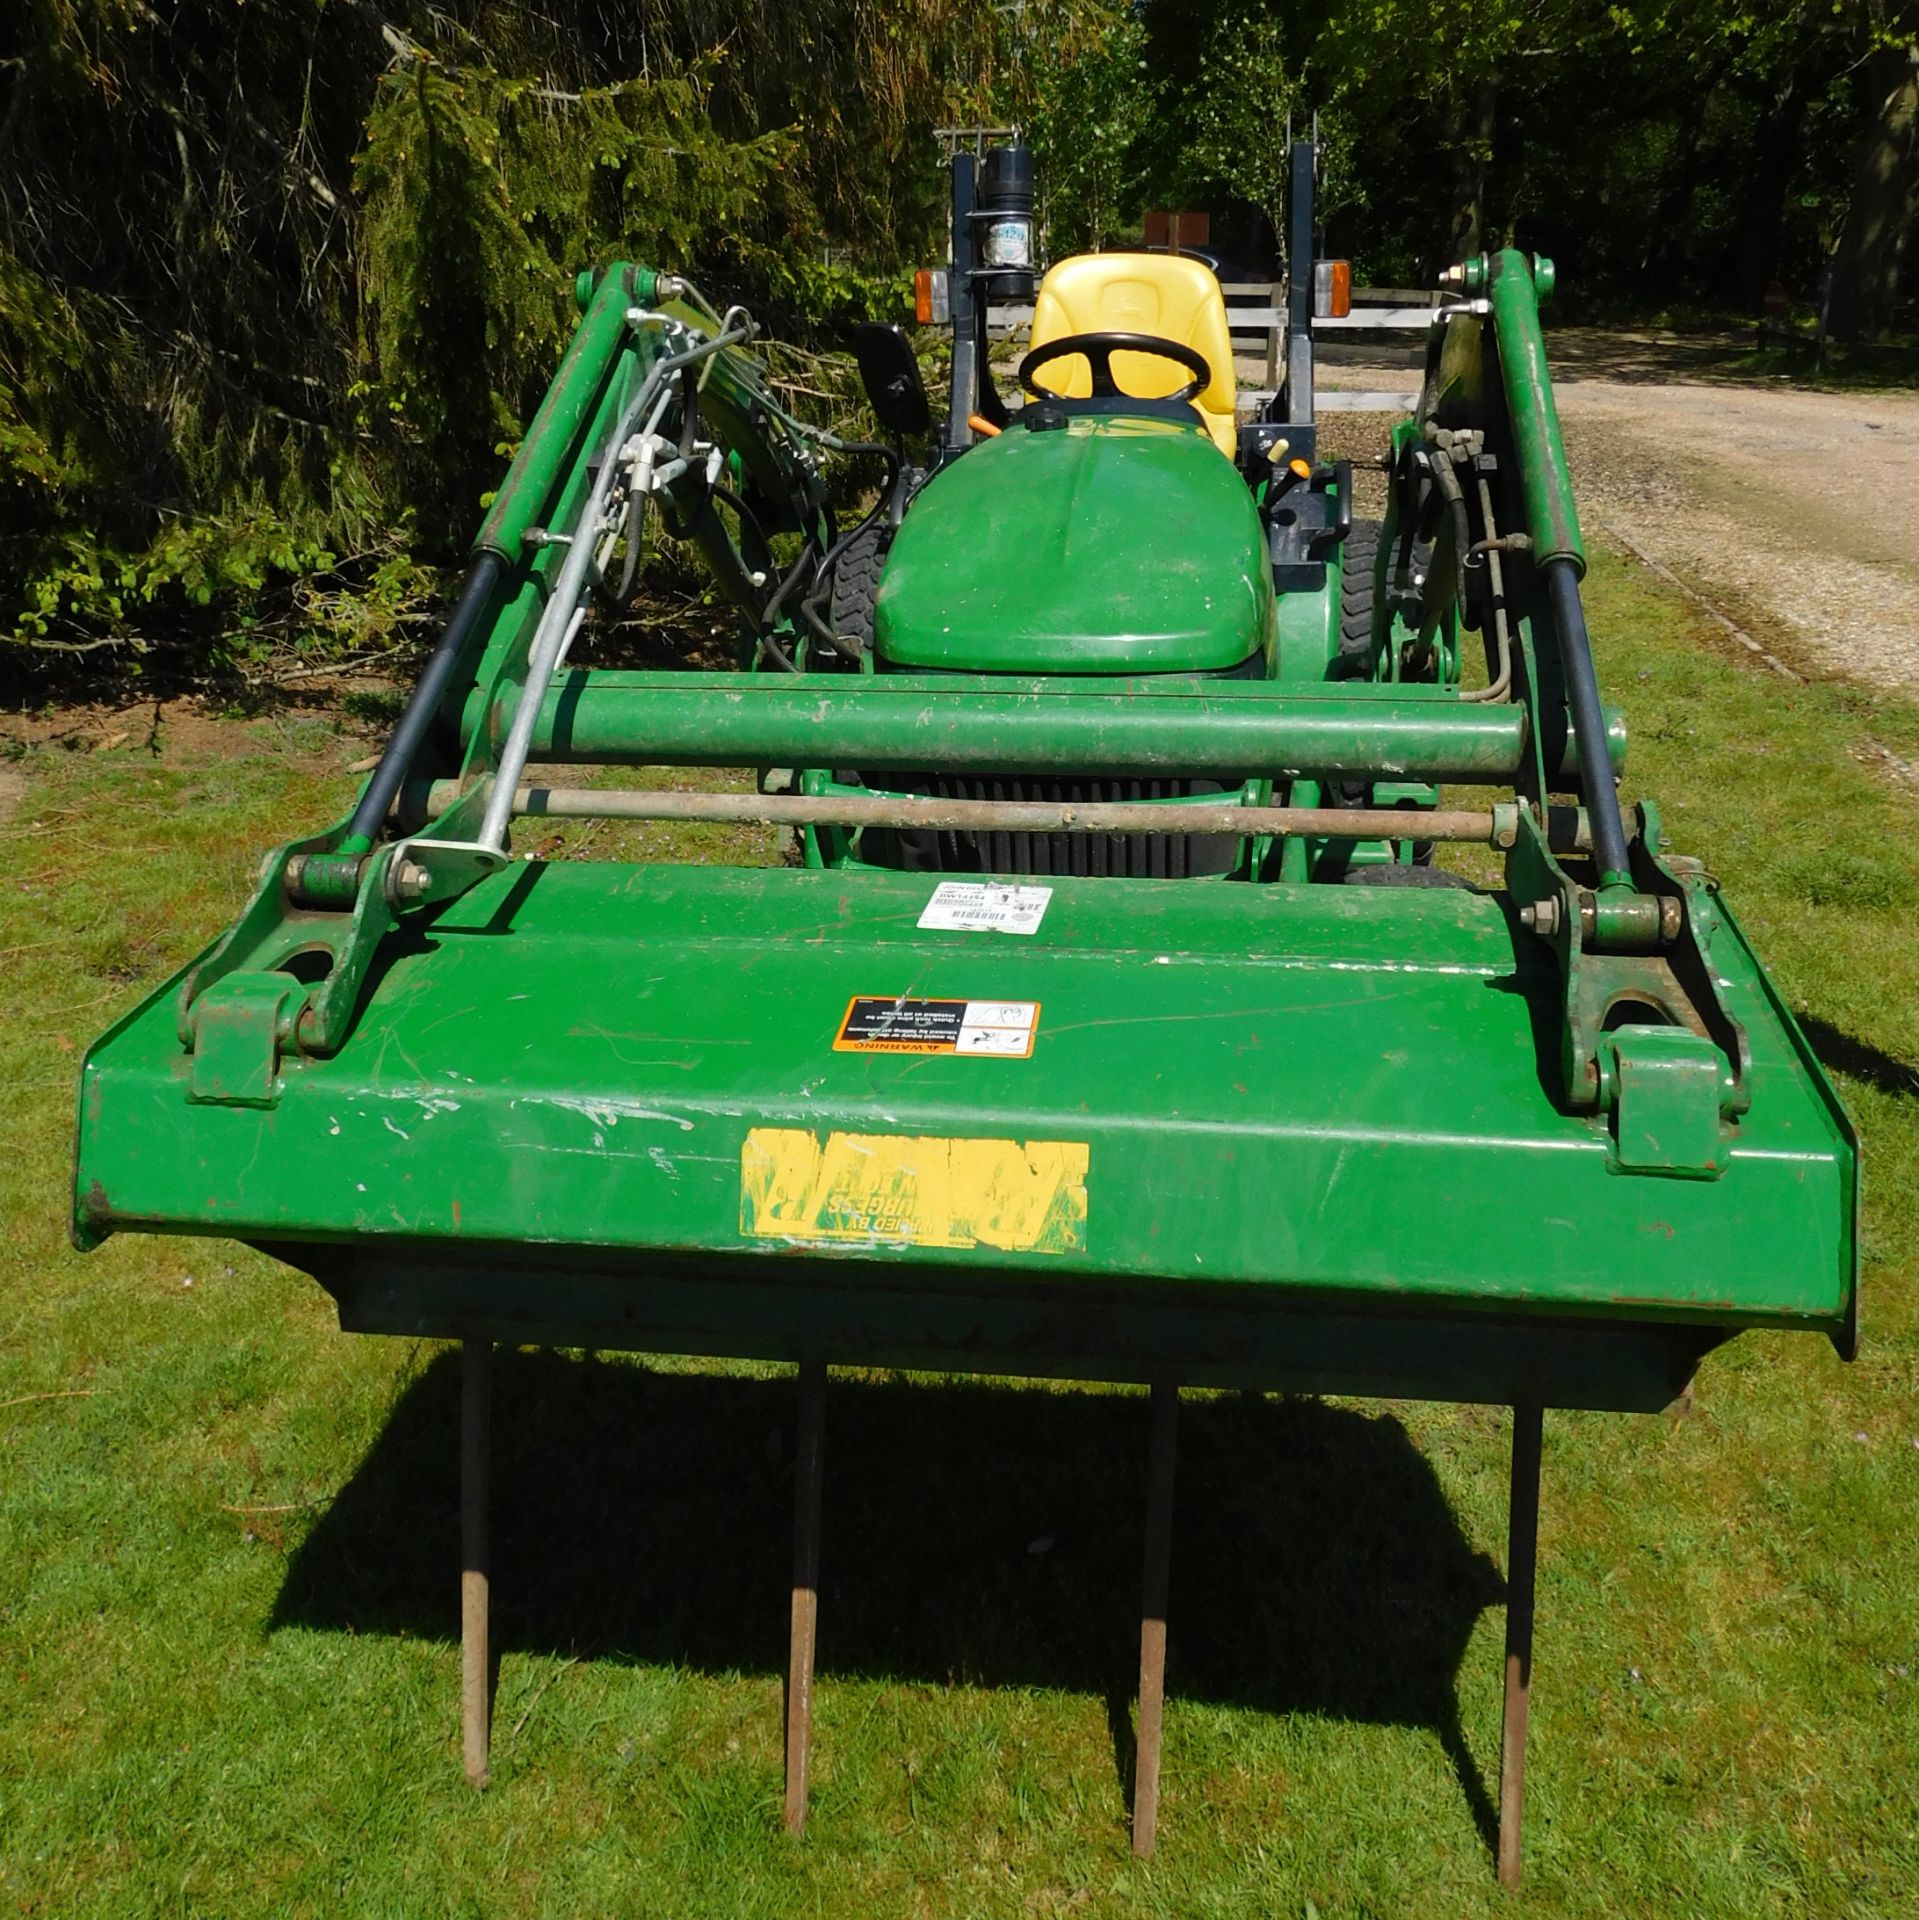 John Deere 2520 Compact Tractor, AU60 DDV, First Registered 6th January 2011, 770 Hours with Spare - Image 6 of 10